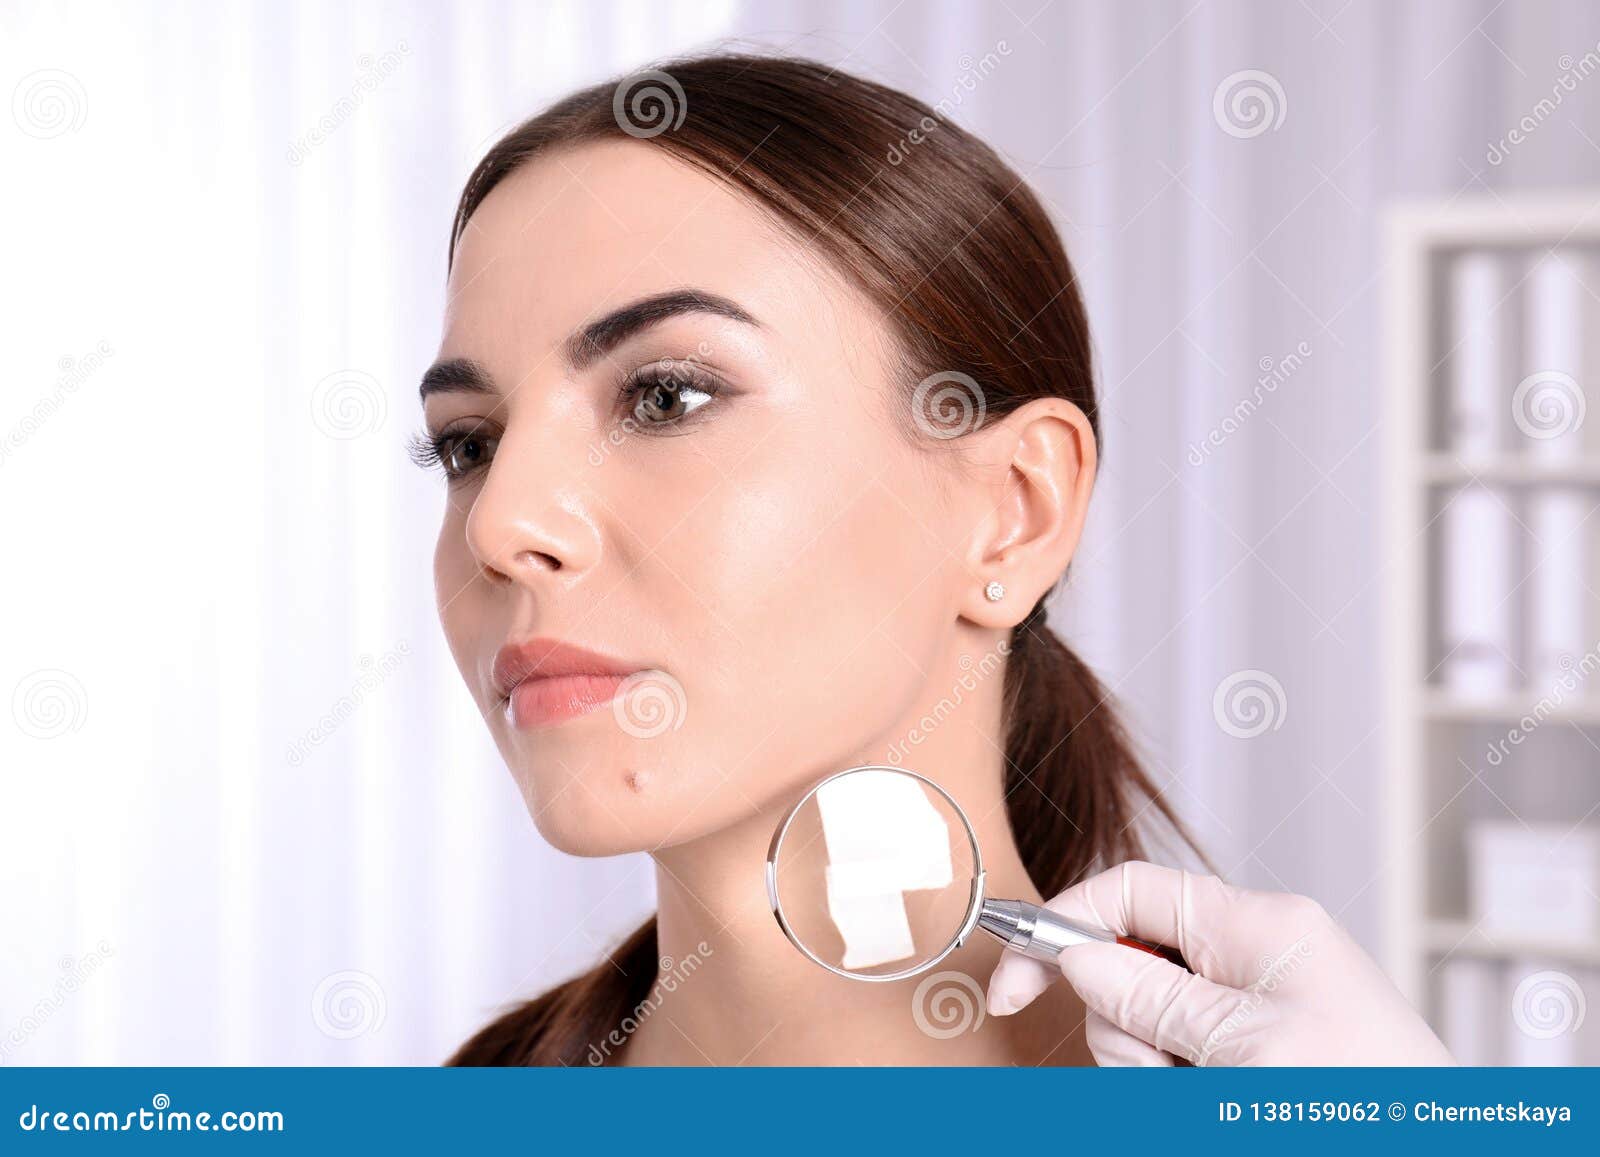 Dermatologist Examining Patient With Magnifying Glass Stock Photo